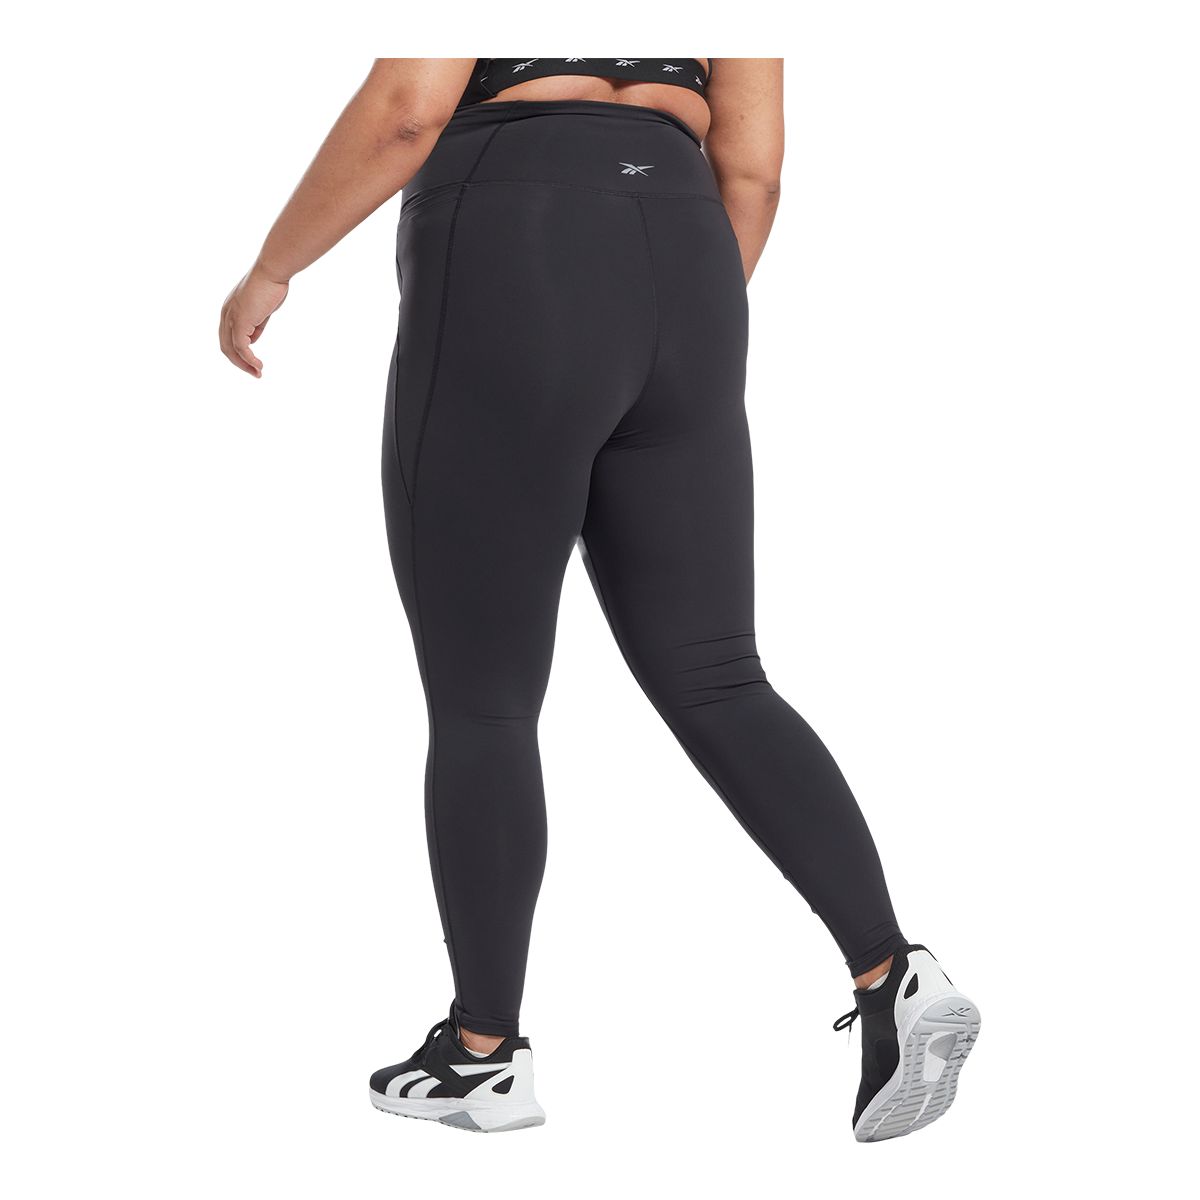  Energy Zone womens High Waist Fitted 7/8 Leggings, Deep Black,  Small US : Sports & Outdoors